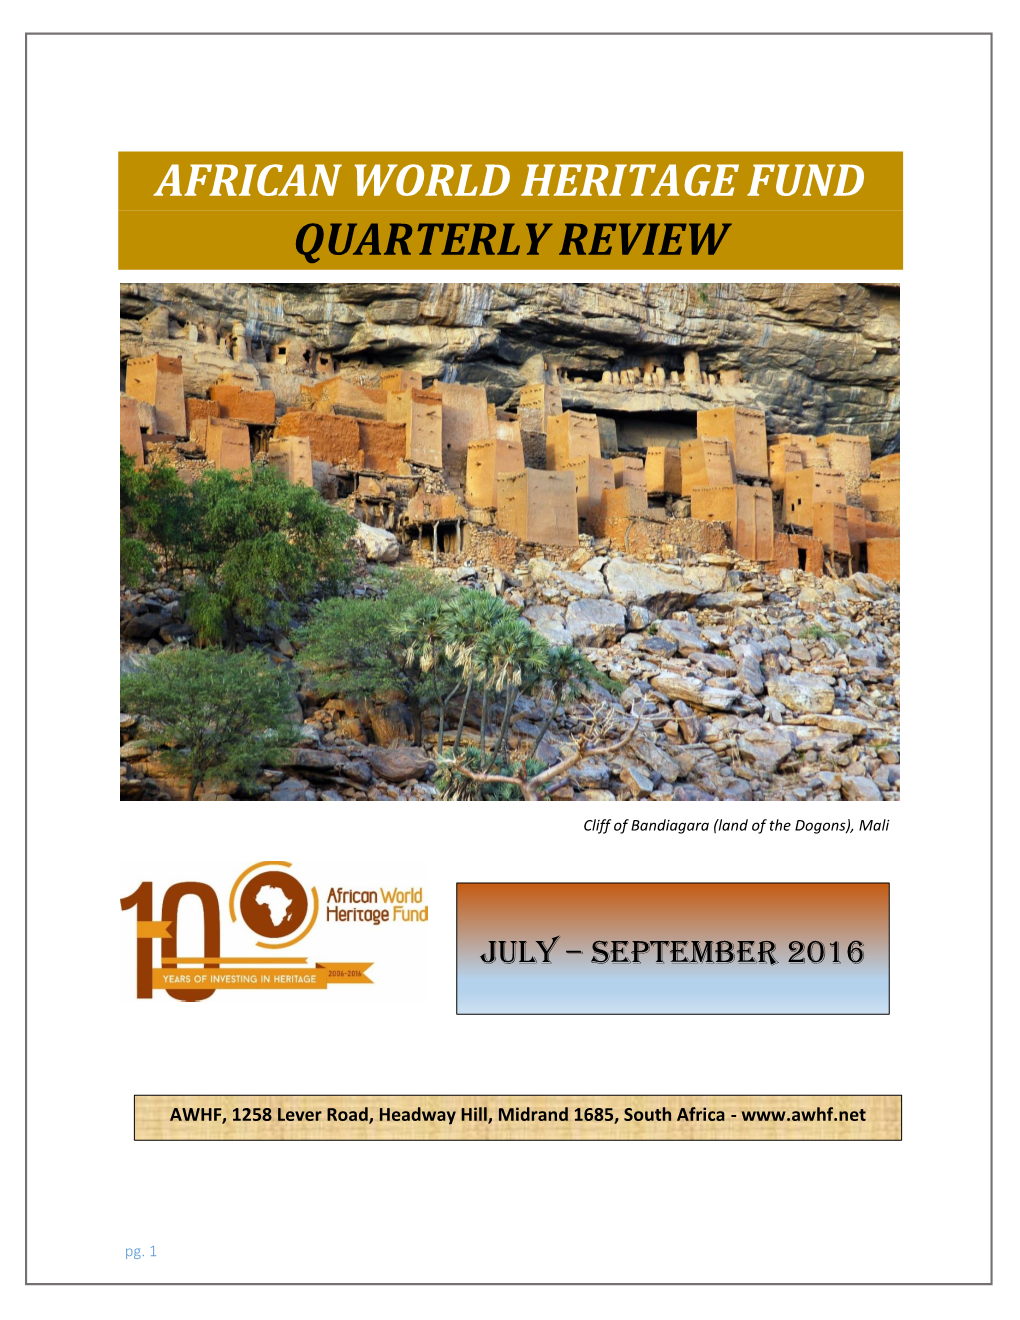 African World Heritage Fund Quarterly Review